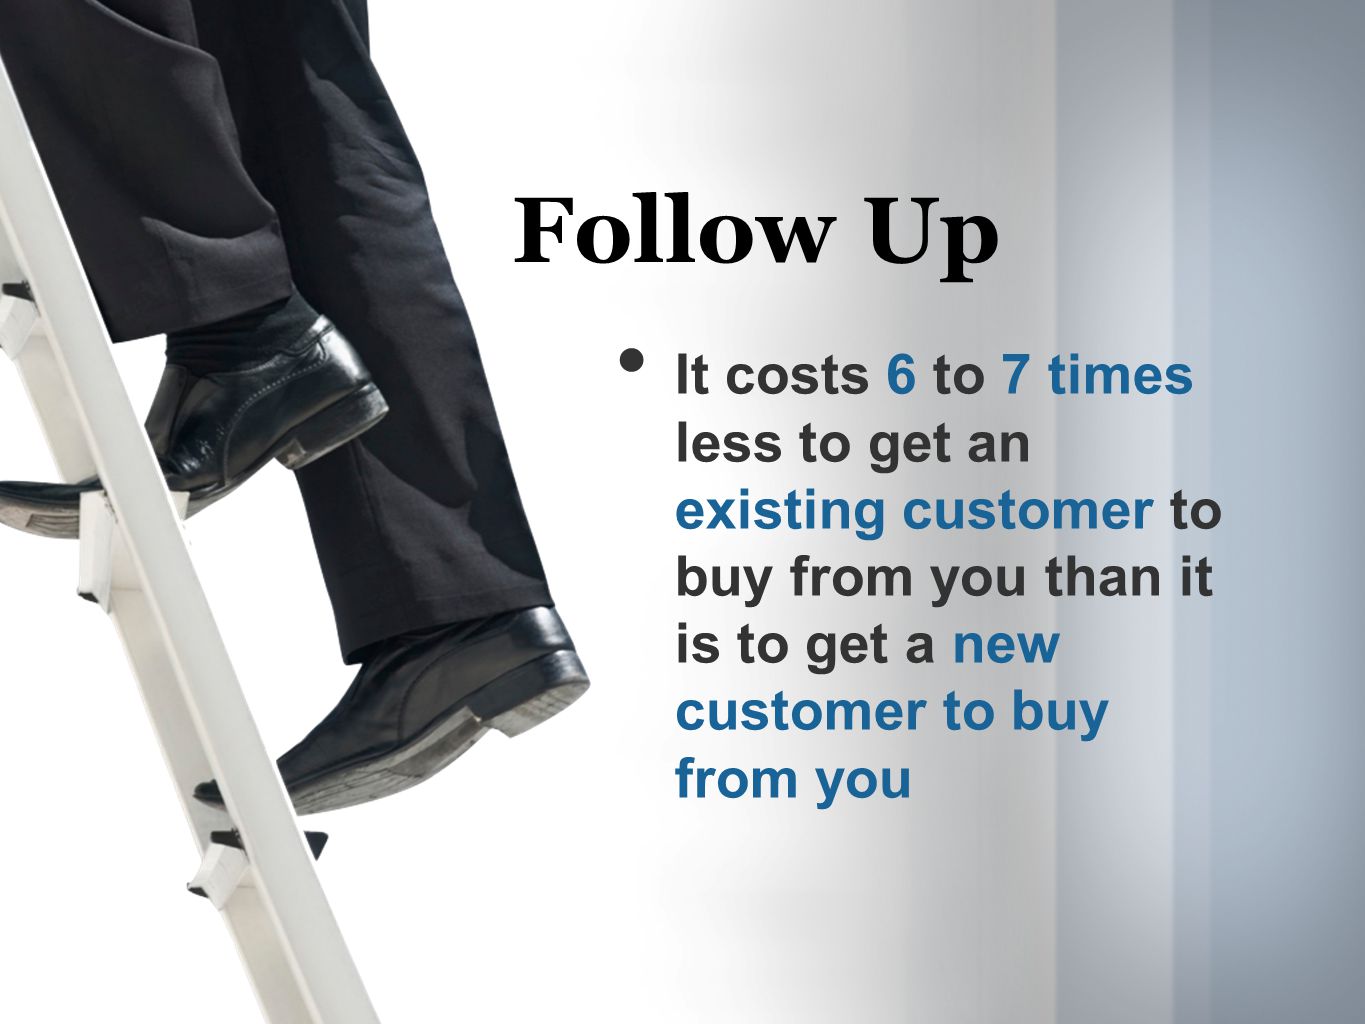 It costs 6 to 7 times less to get an existing customer to buy from you than it is to get a new customer to buy from you Follow Up